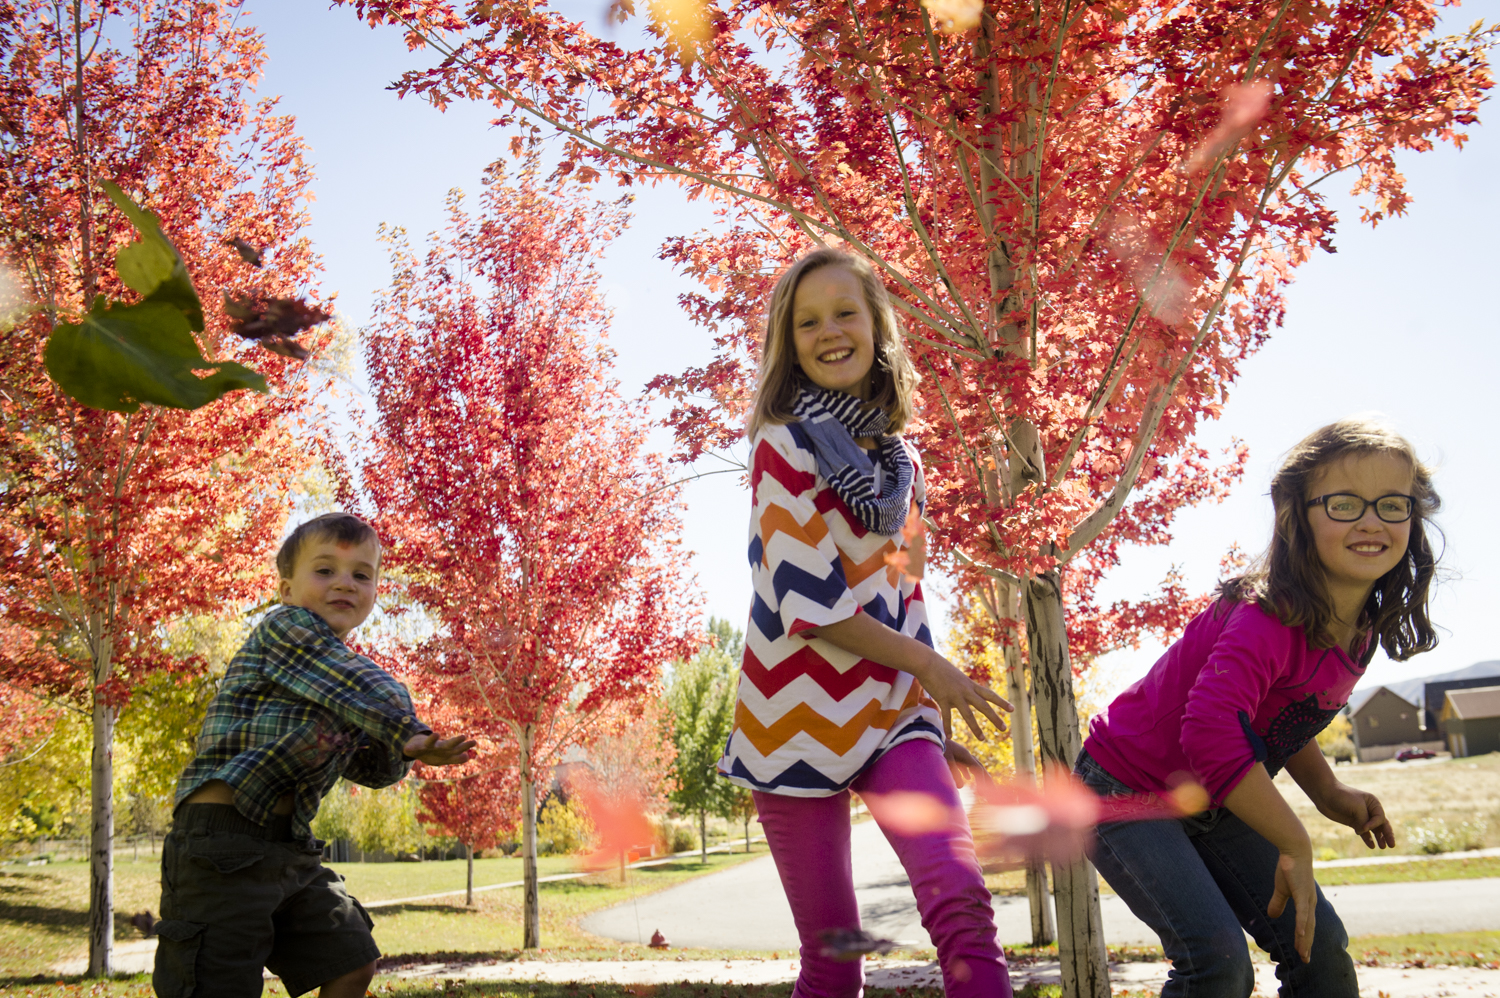 fall_lifestyle_family_leaves_candid_playing-004.jpg